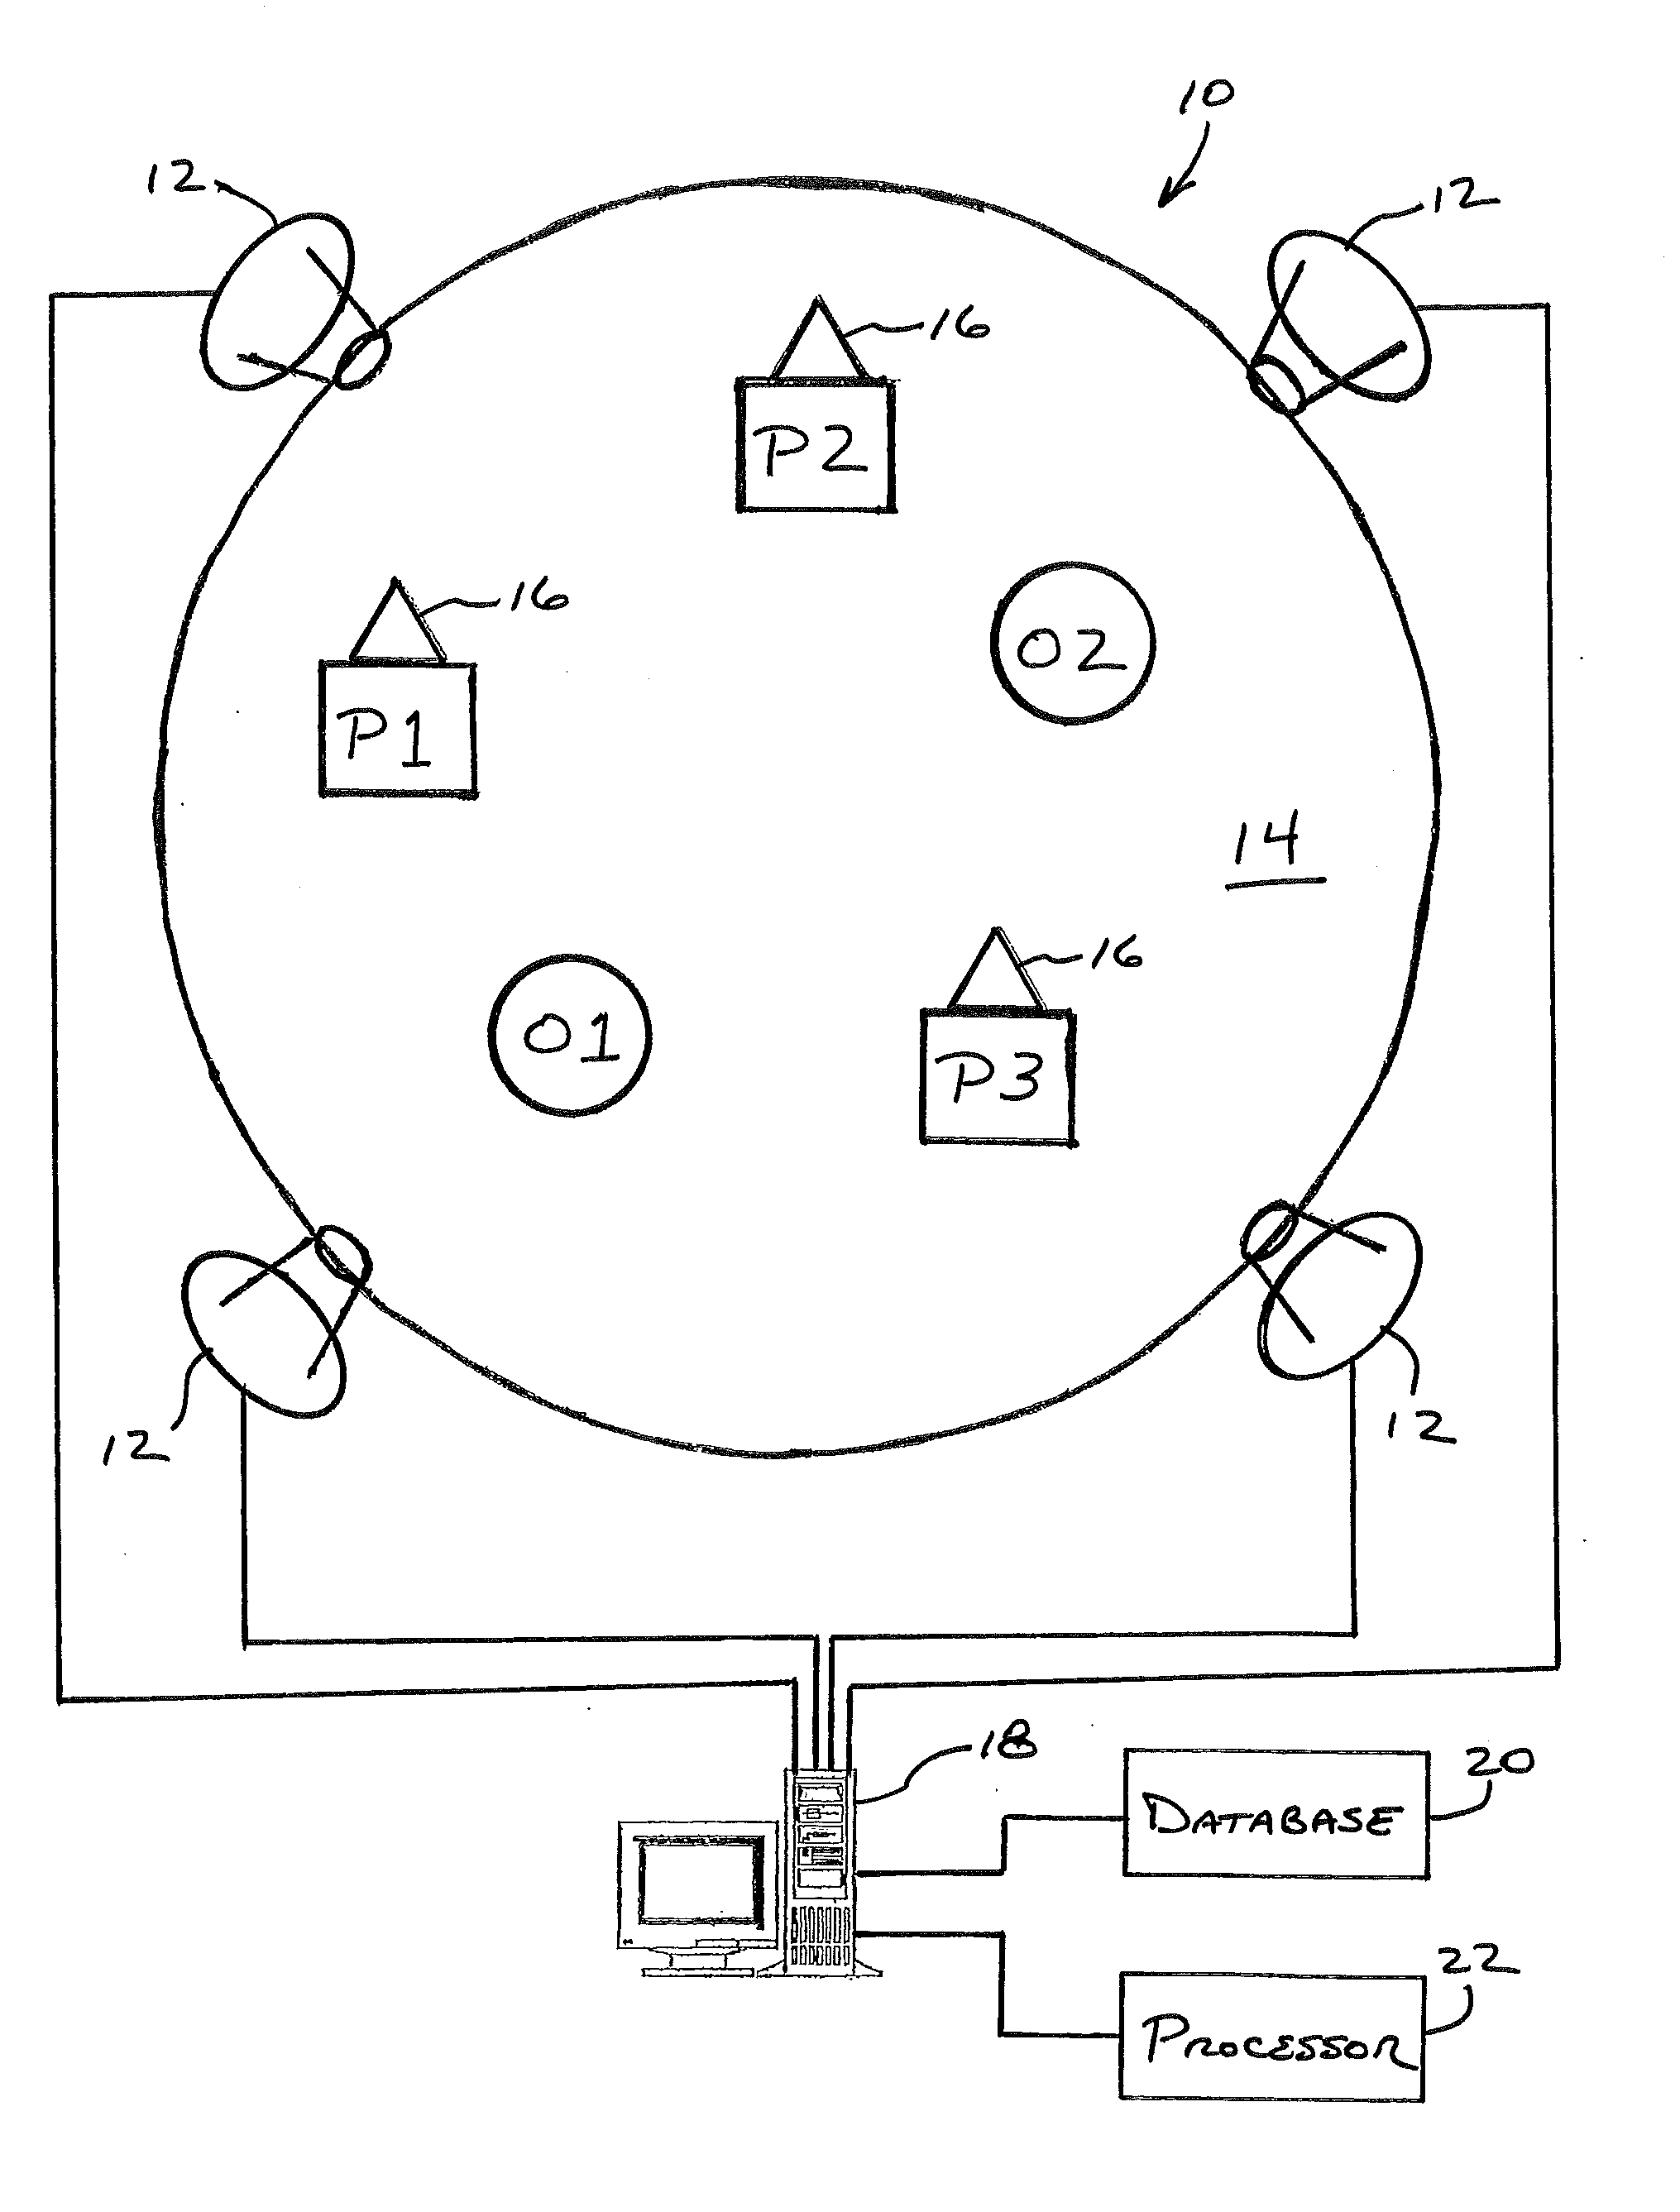 System and Method for Tracking, Monitoring and Deriving the Location of Transient Objects by Monitoring the Location of Equipment Used to Move the Objects